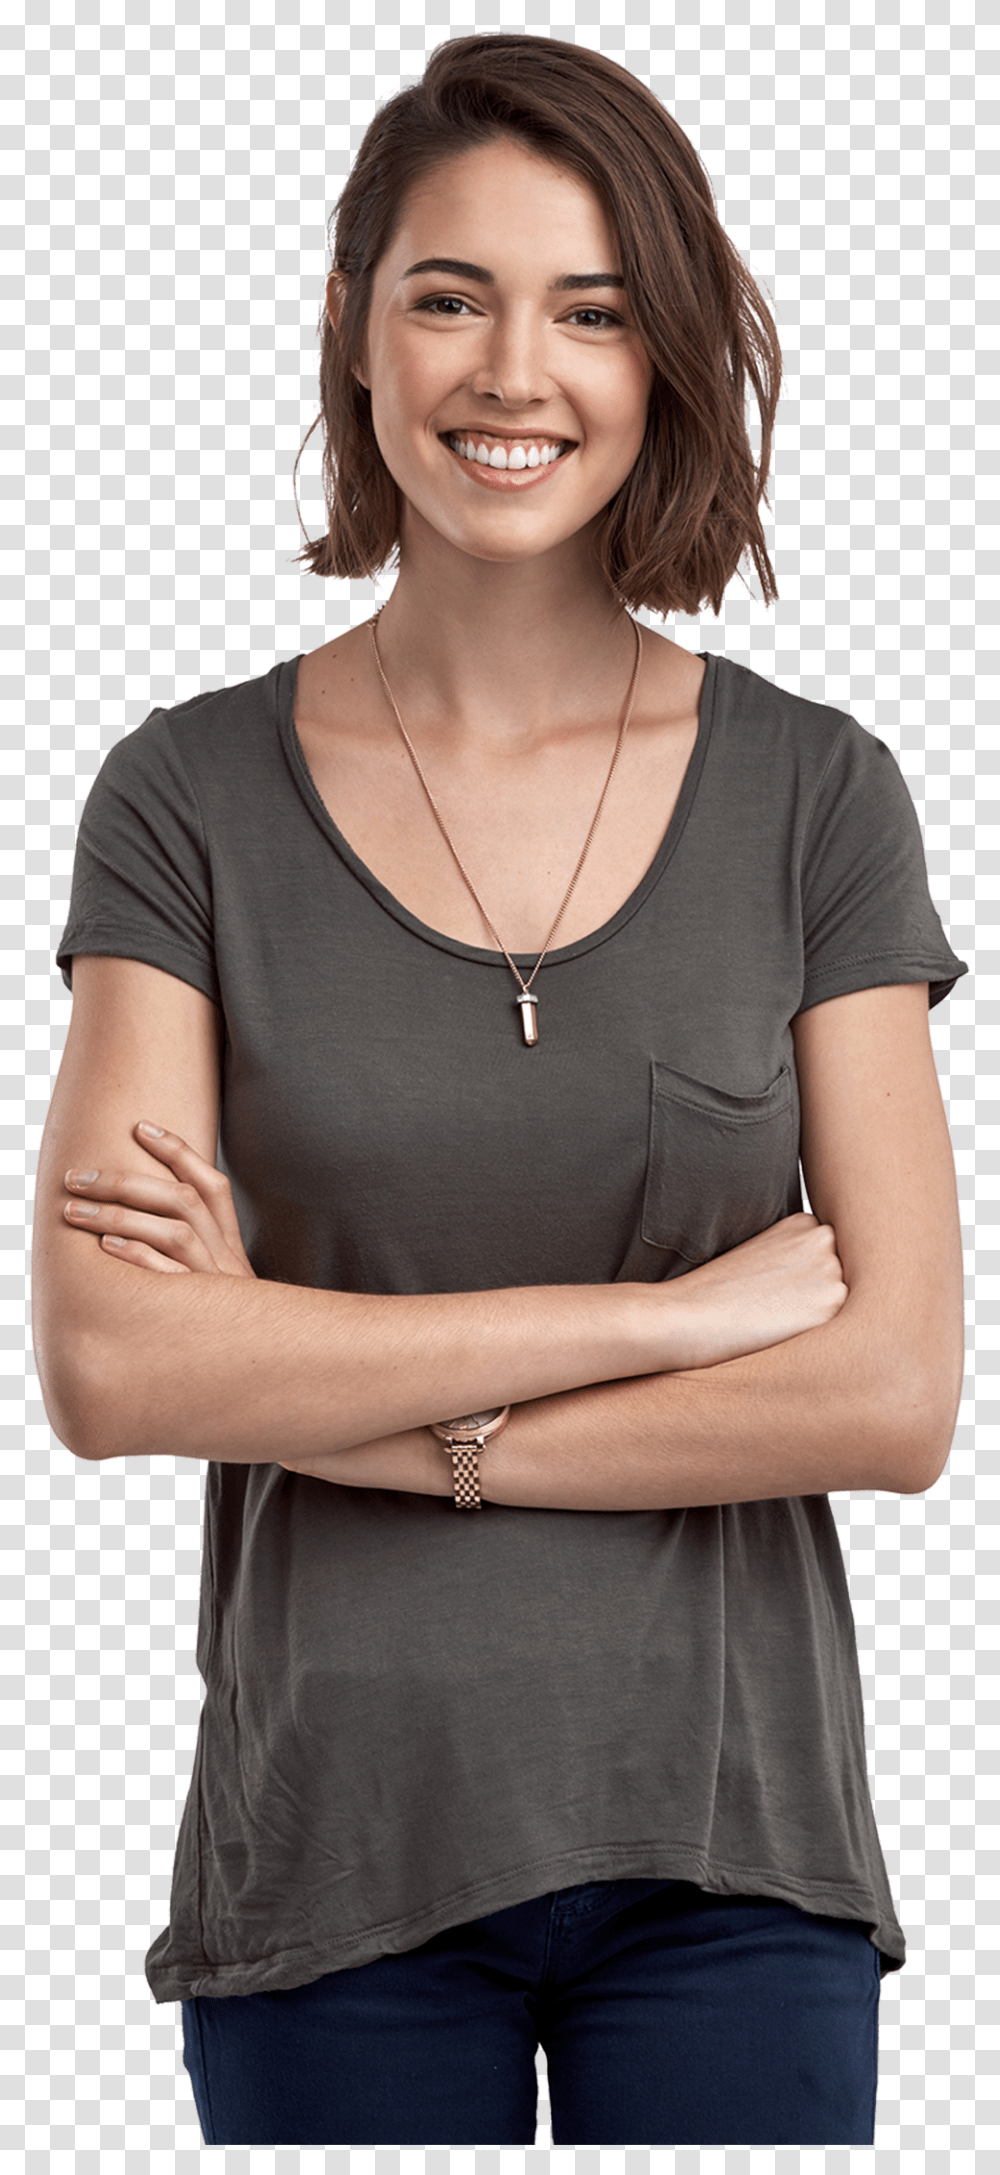 Happy Woman Next To White Label Ppc Management Services Young Woman Stock, Person, Human, Necklace, Jewelry Transparent Png